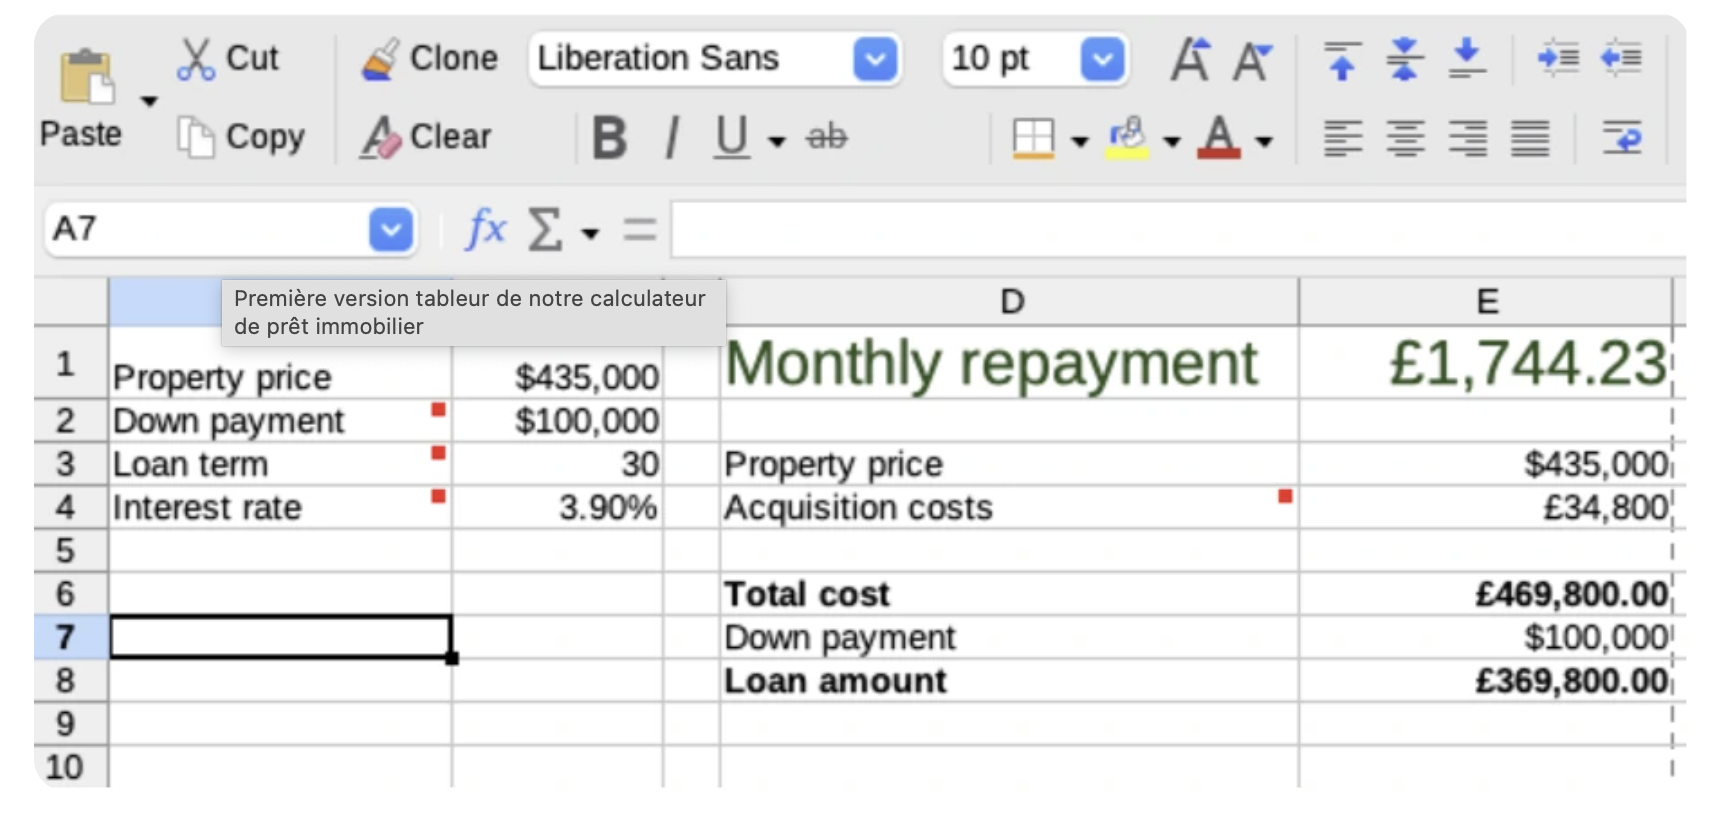 First spreadsheet version of our mortgage calculator